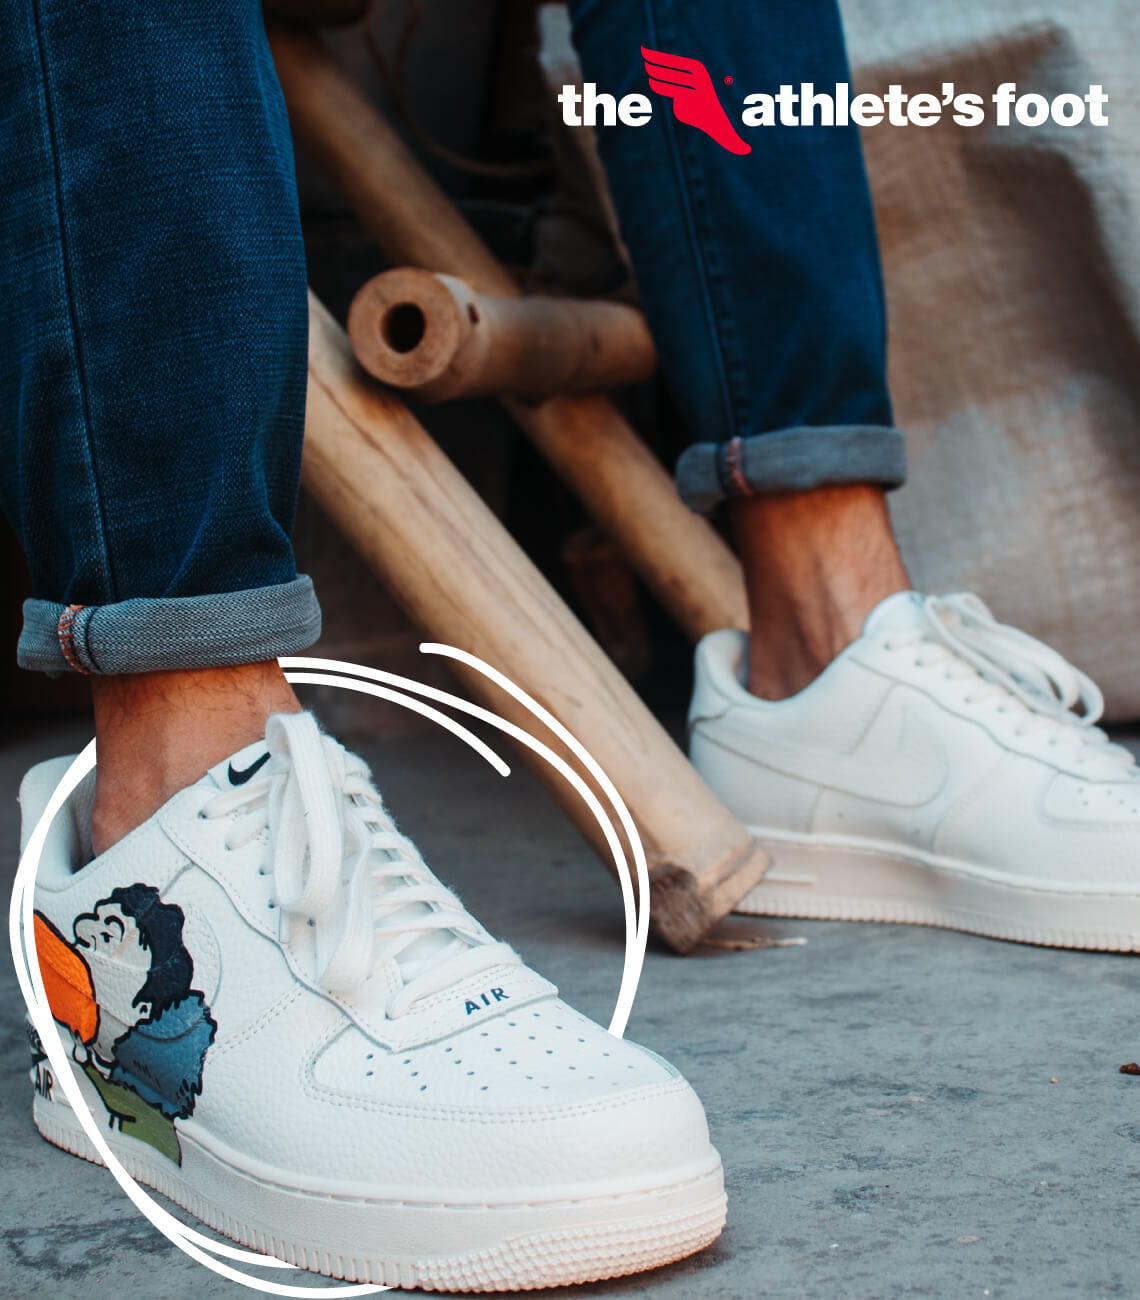 The Athlete's foot: DIGITAL STRATEGY & CONTENT CREATION